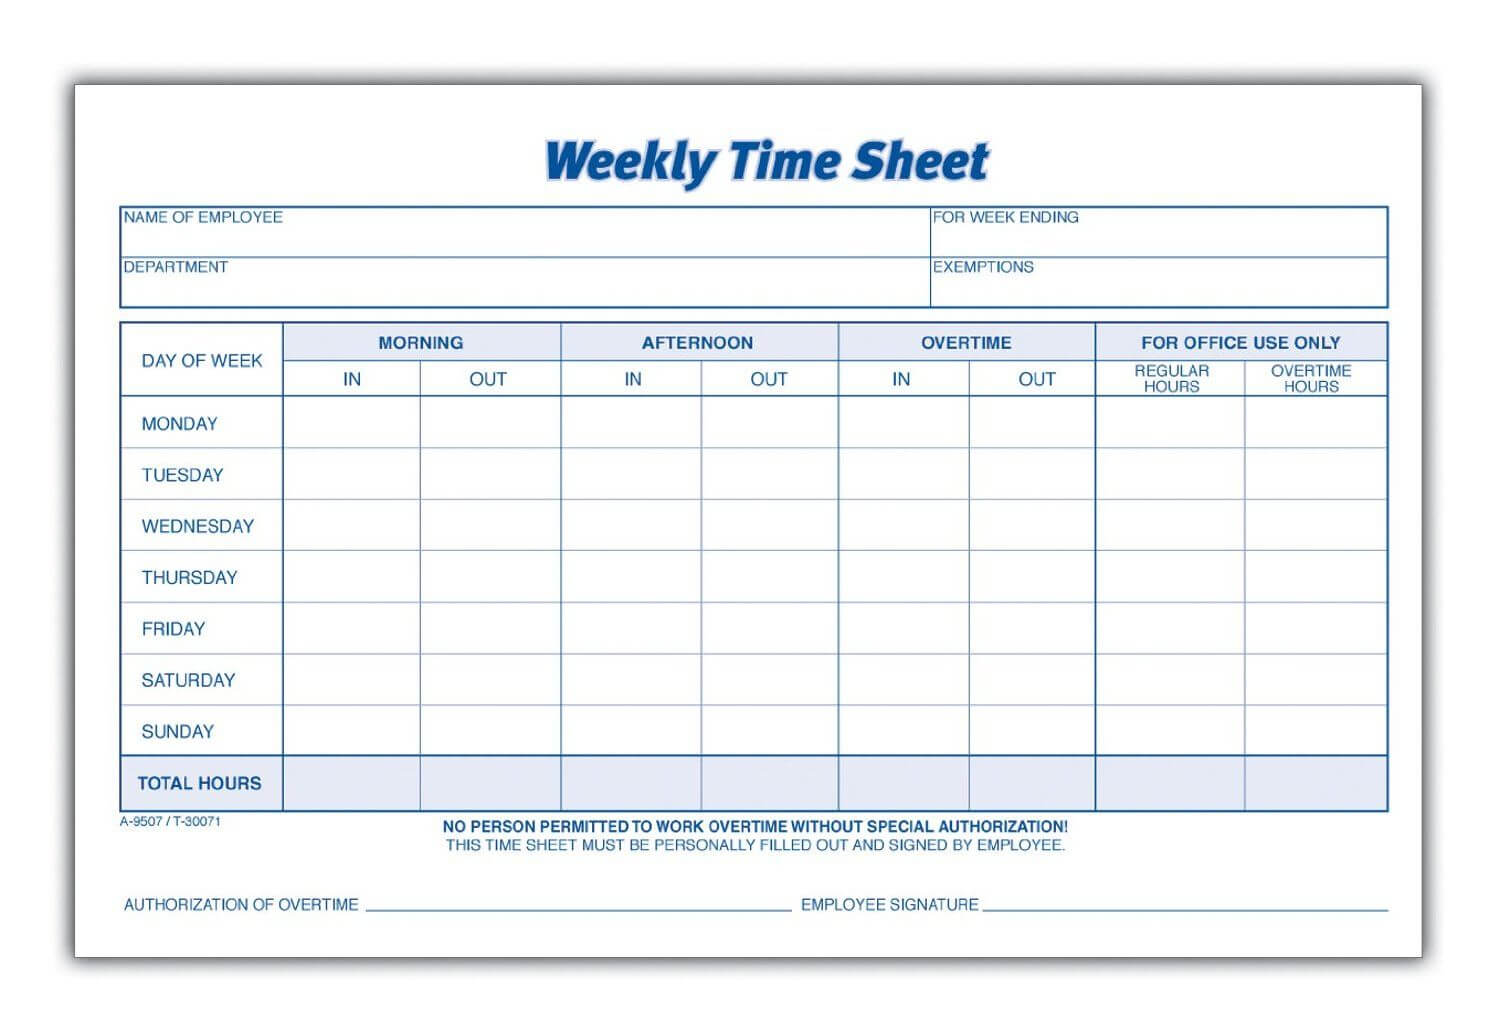 Weekly Employee Time Sheet | Time Sheet Printable, Timesheet Intended For Weekly Time Card Template Free